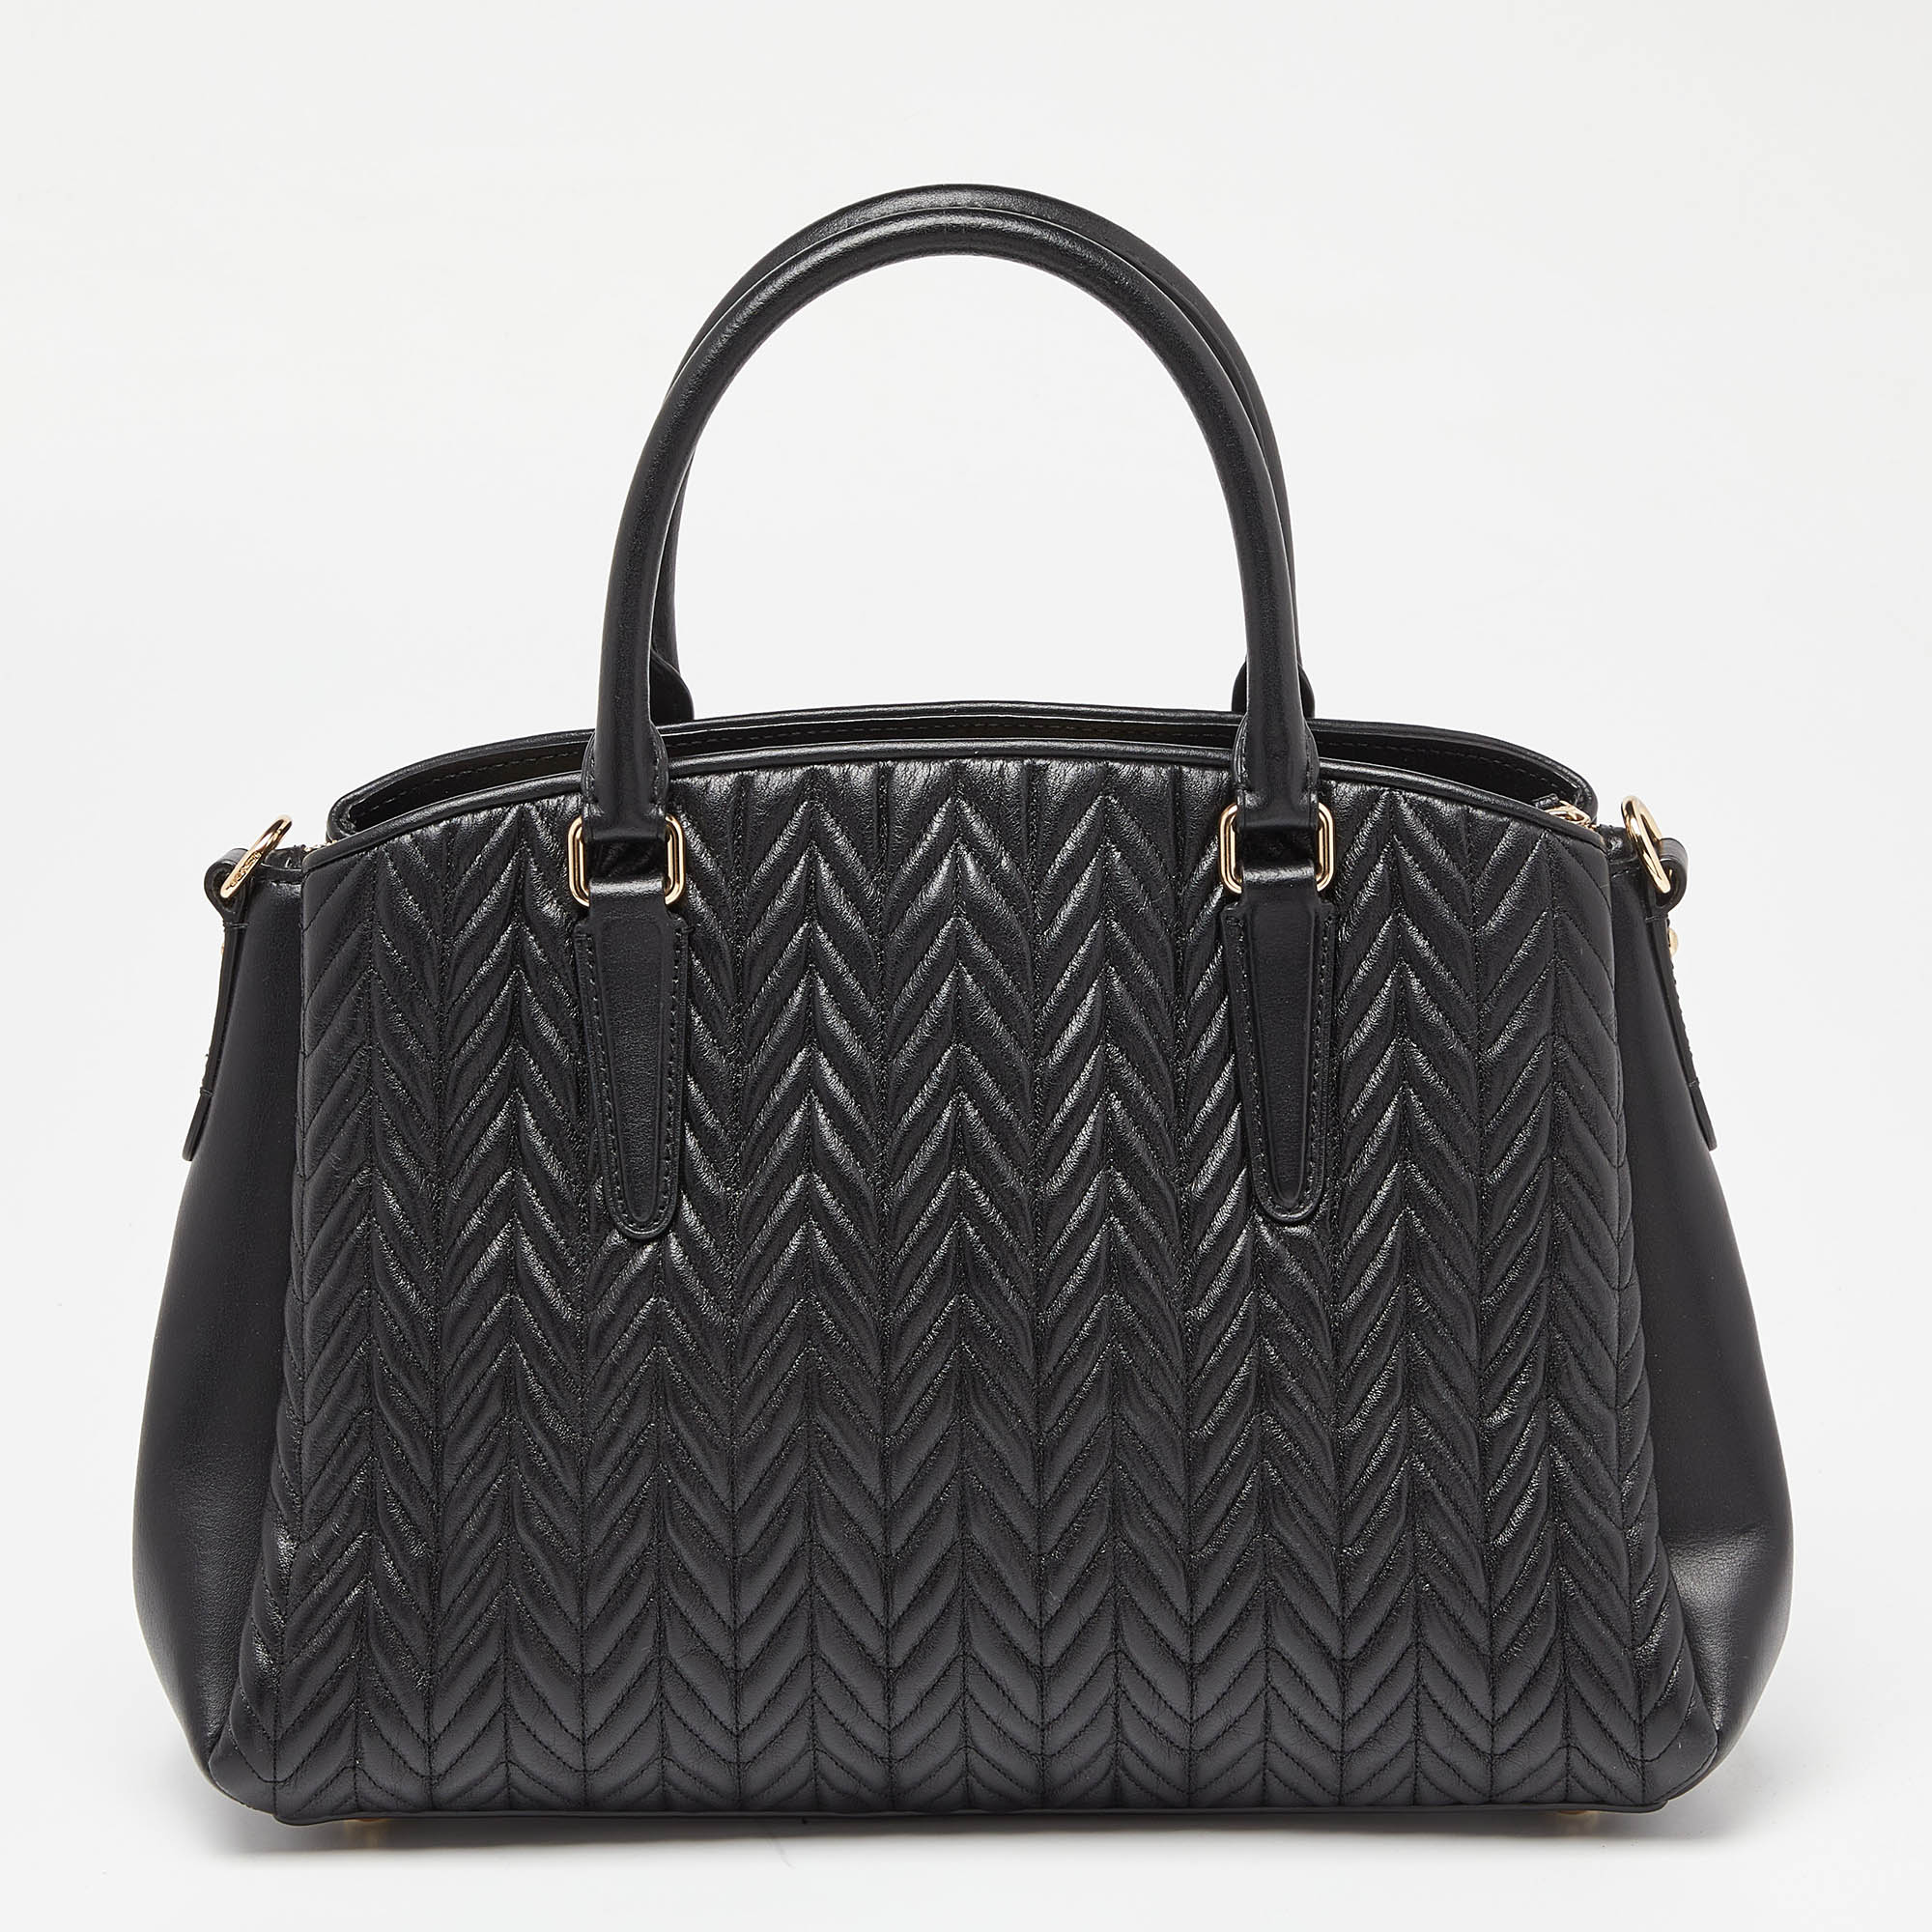 Coach Black Quilted Leather Sage Carryall Satchel